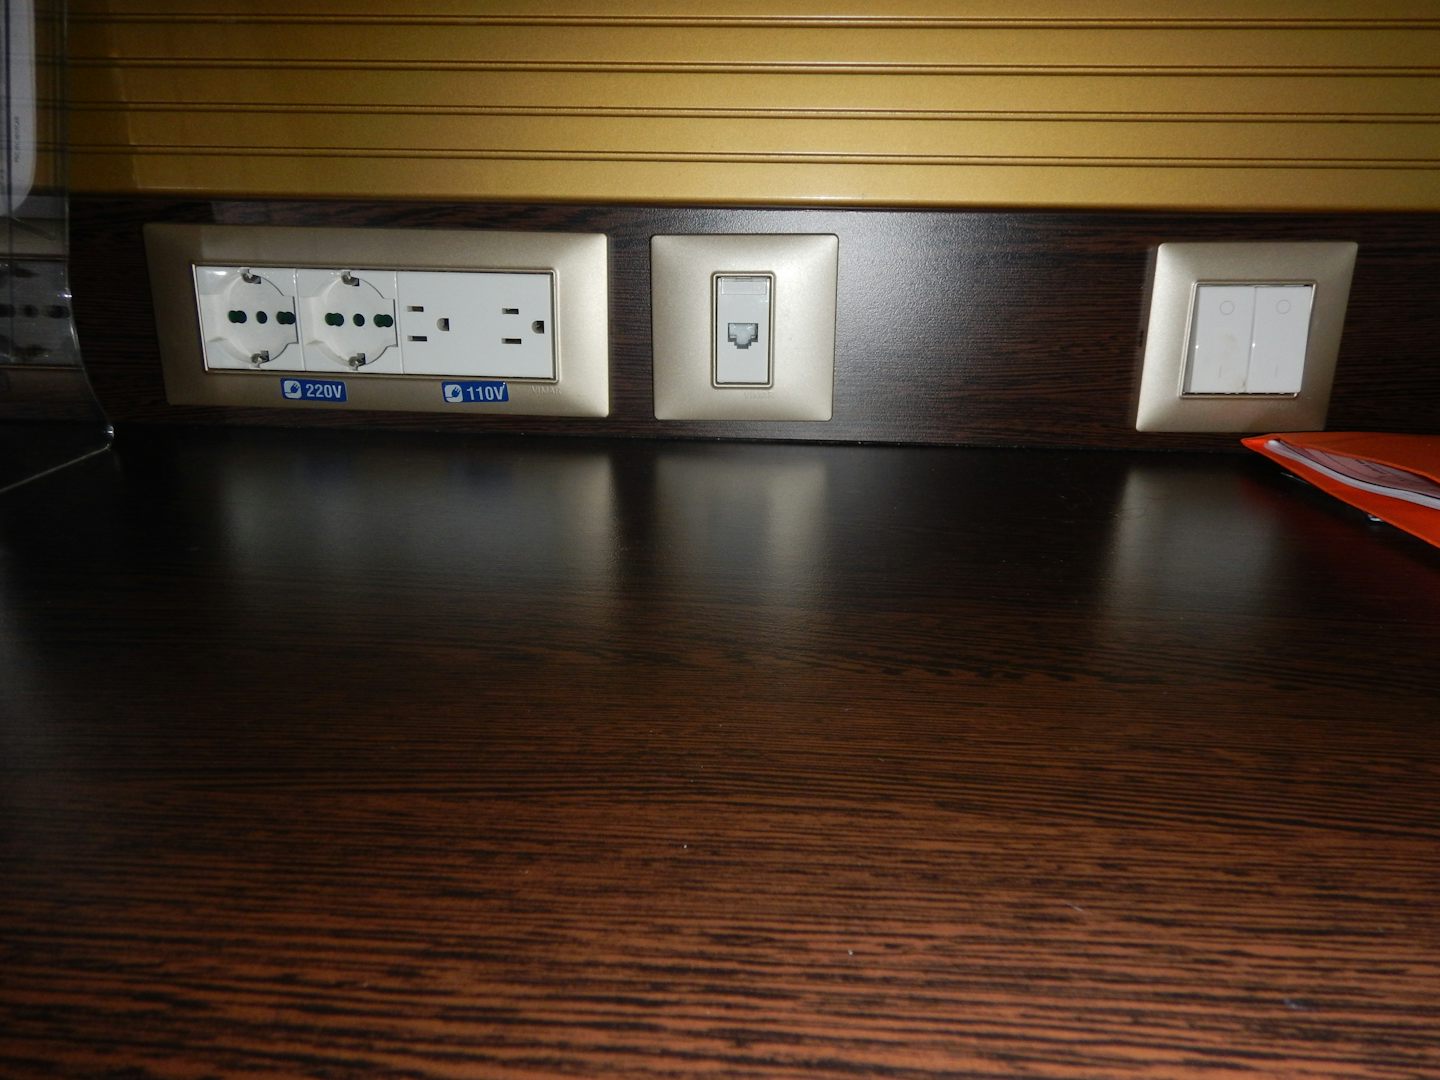 EU and US plugs on desk in cabin